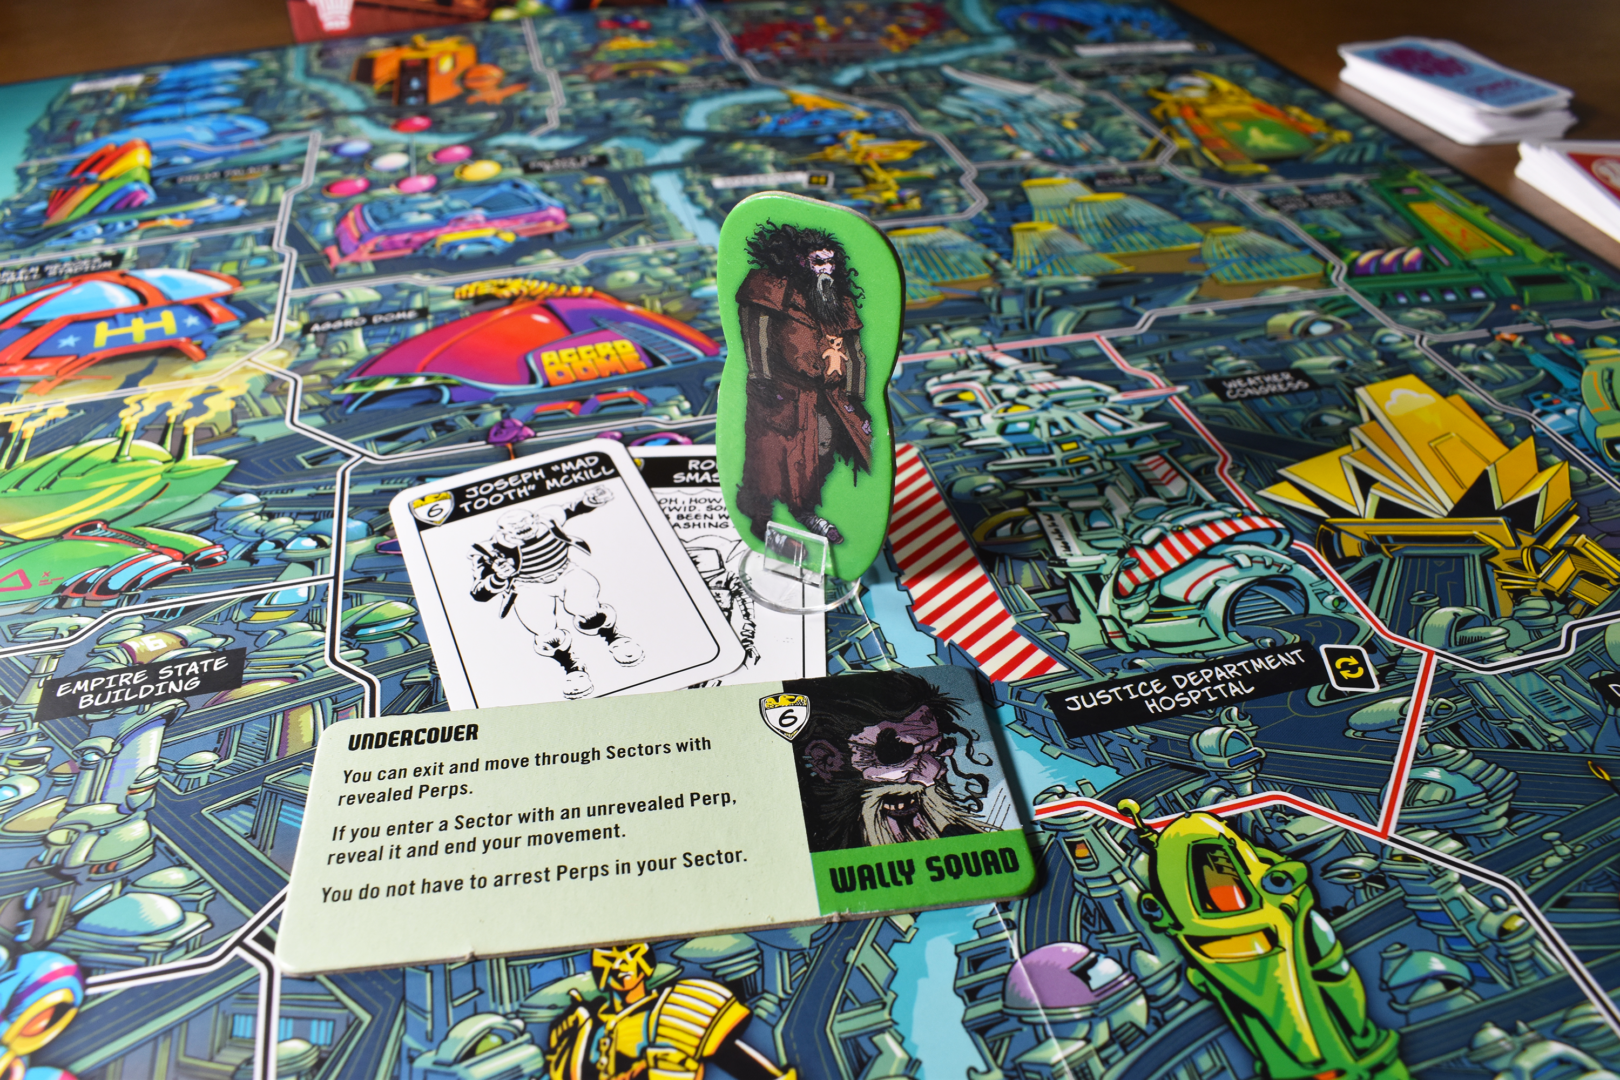 A standee of Dirty Frank standing a board depicting Mega-City One, with a Perp and Crime card beneath him and his Specialist Token in front of him.

The token reads:
"Undercover
You can exit and move through Sectors with revealed Perps.
If you enter a Sector with an unrevealed Perp, reveal it and end your movement.
You do not have to arrest Perps in your sector"